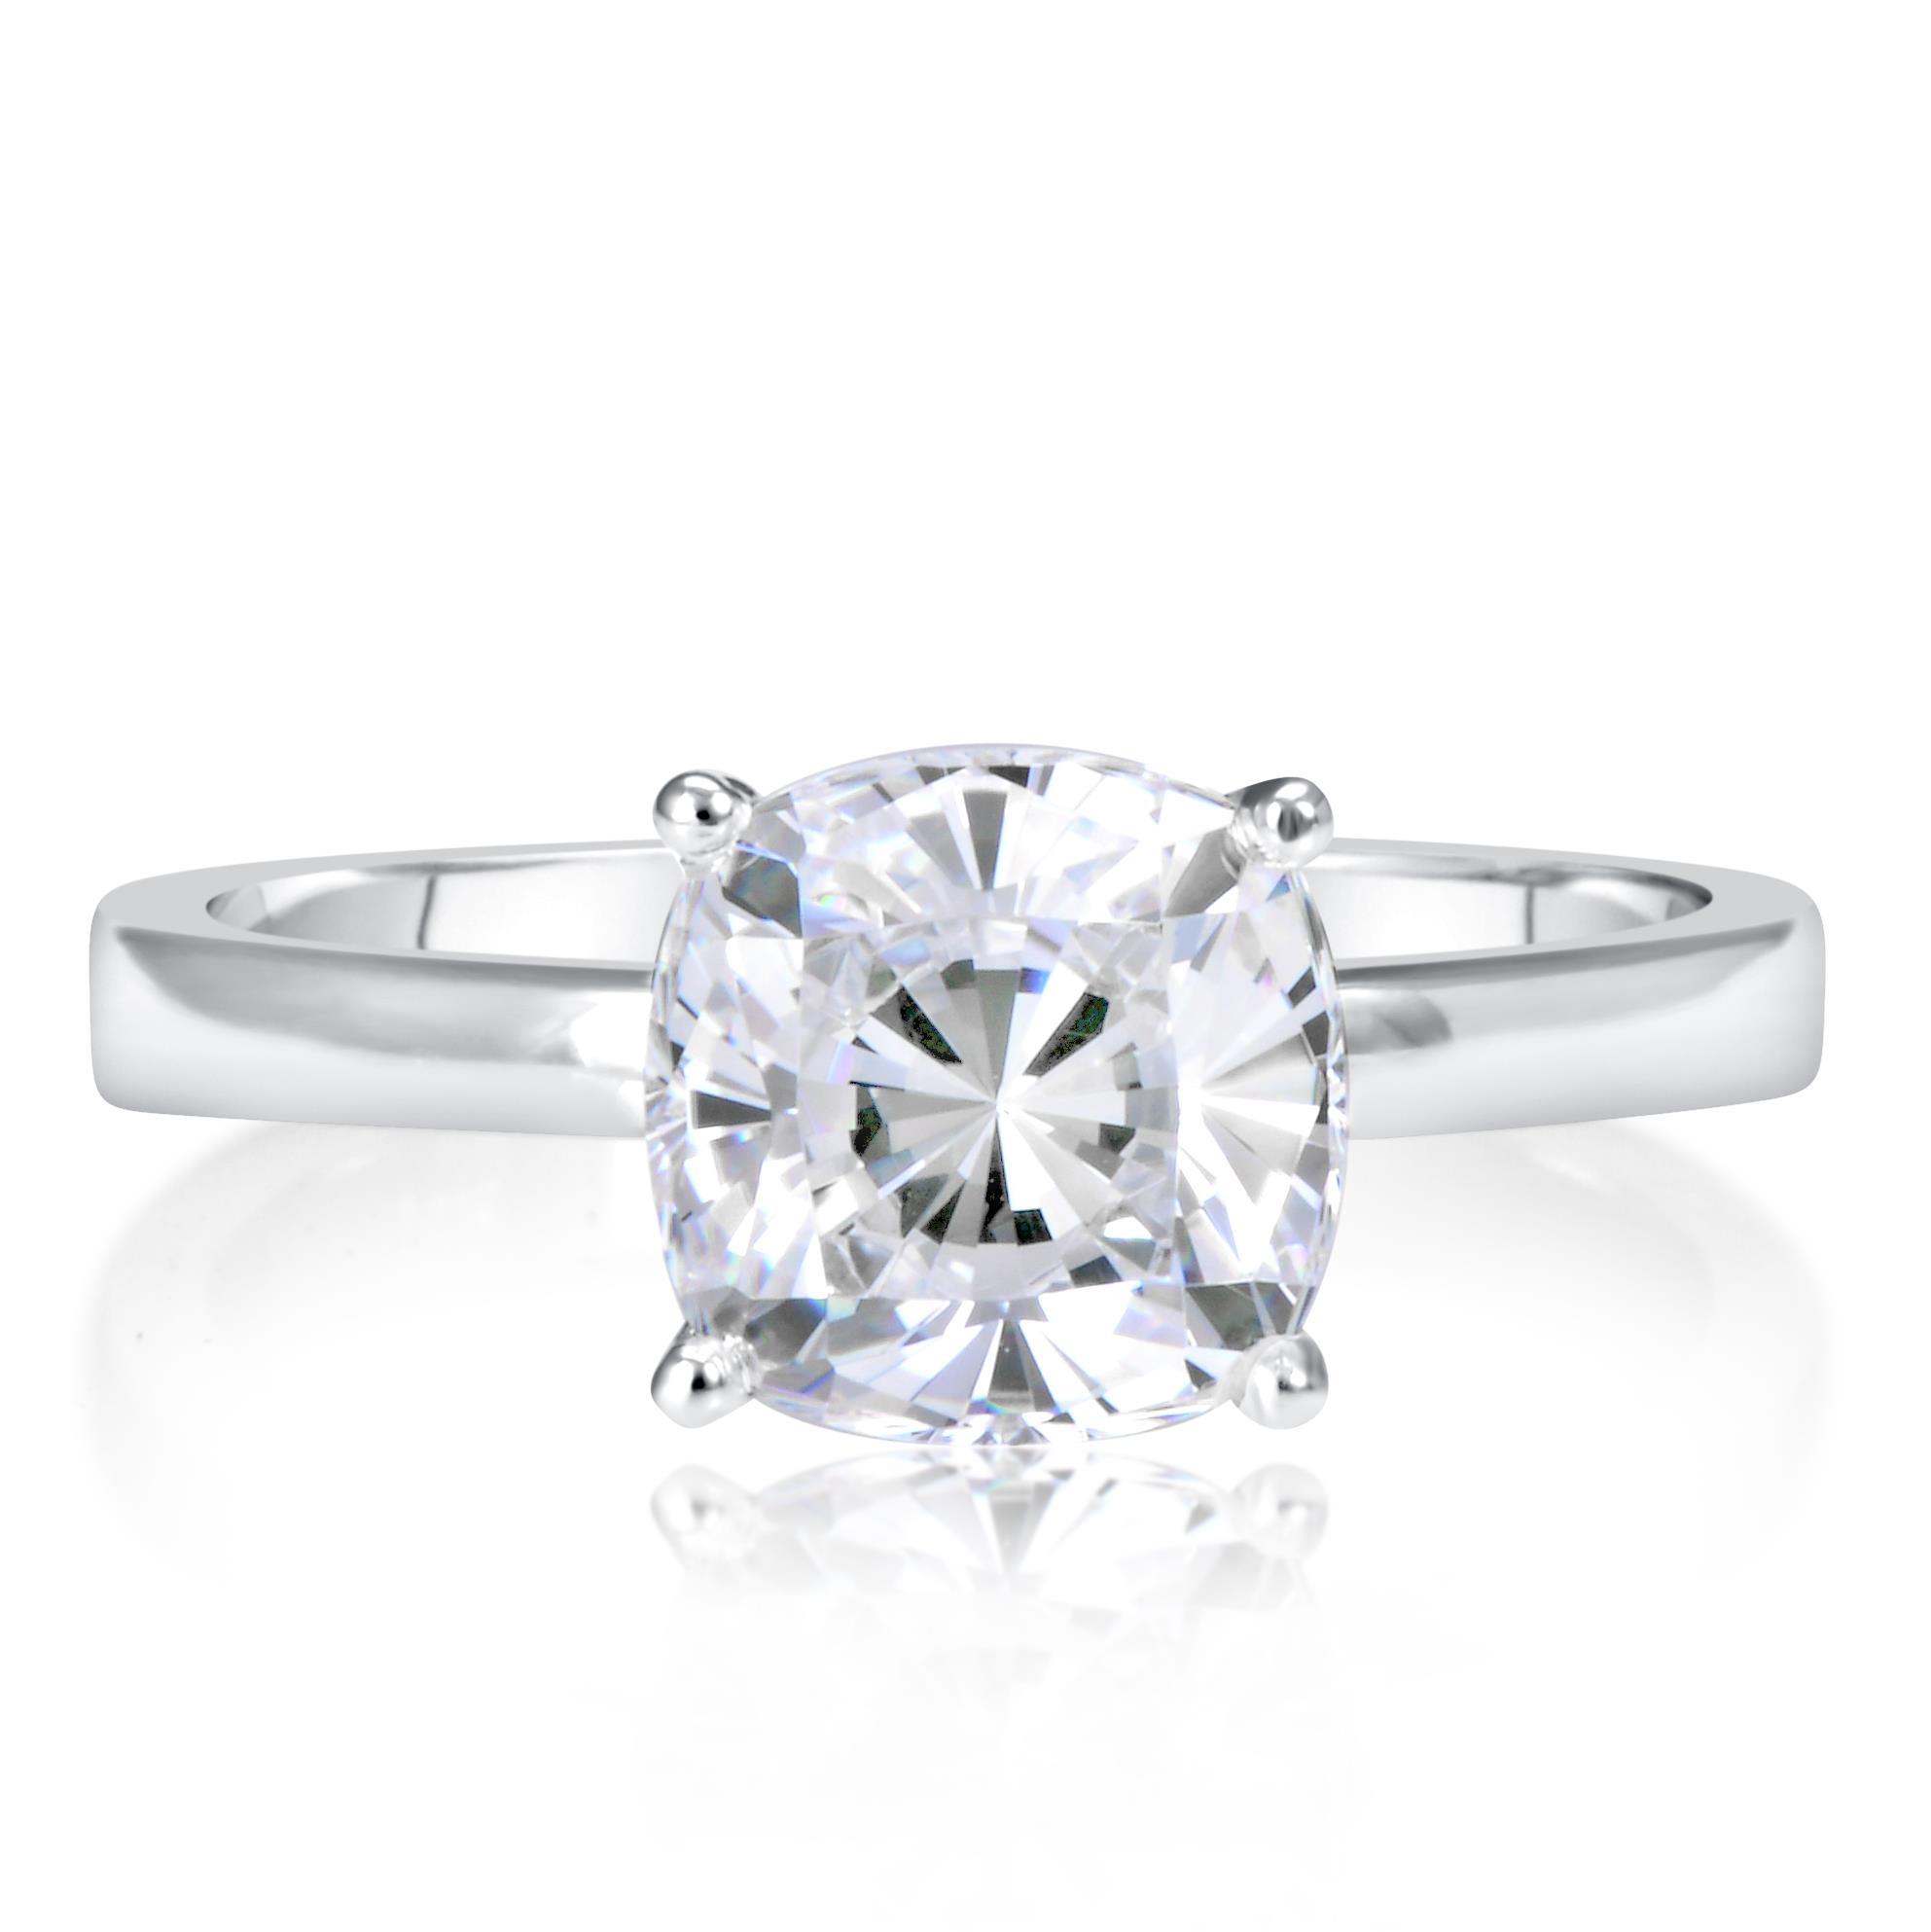 1.75 Ct 4 Prong Solitaire Cushion Cut Diamond Engagement Ring VS2 F ...